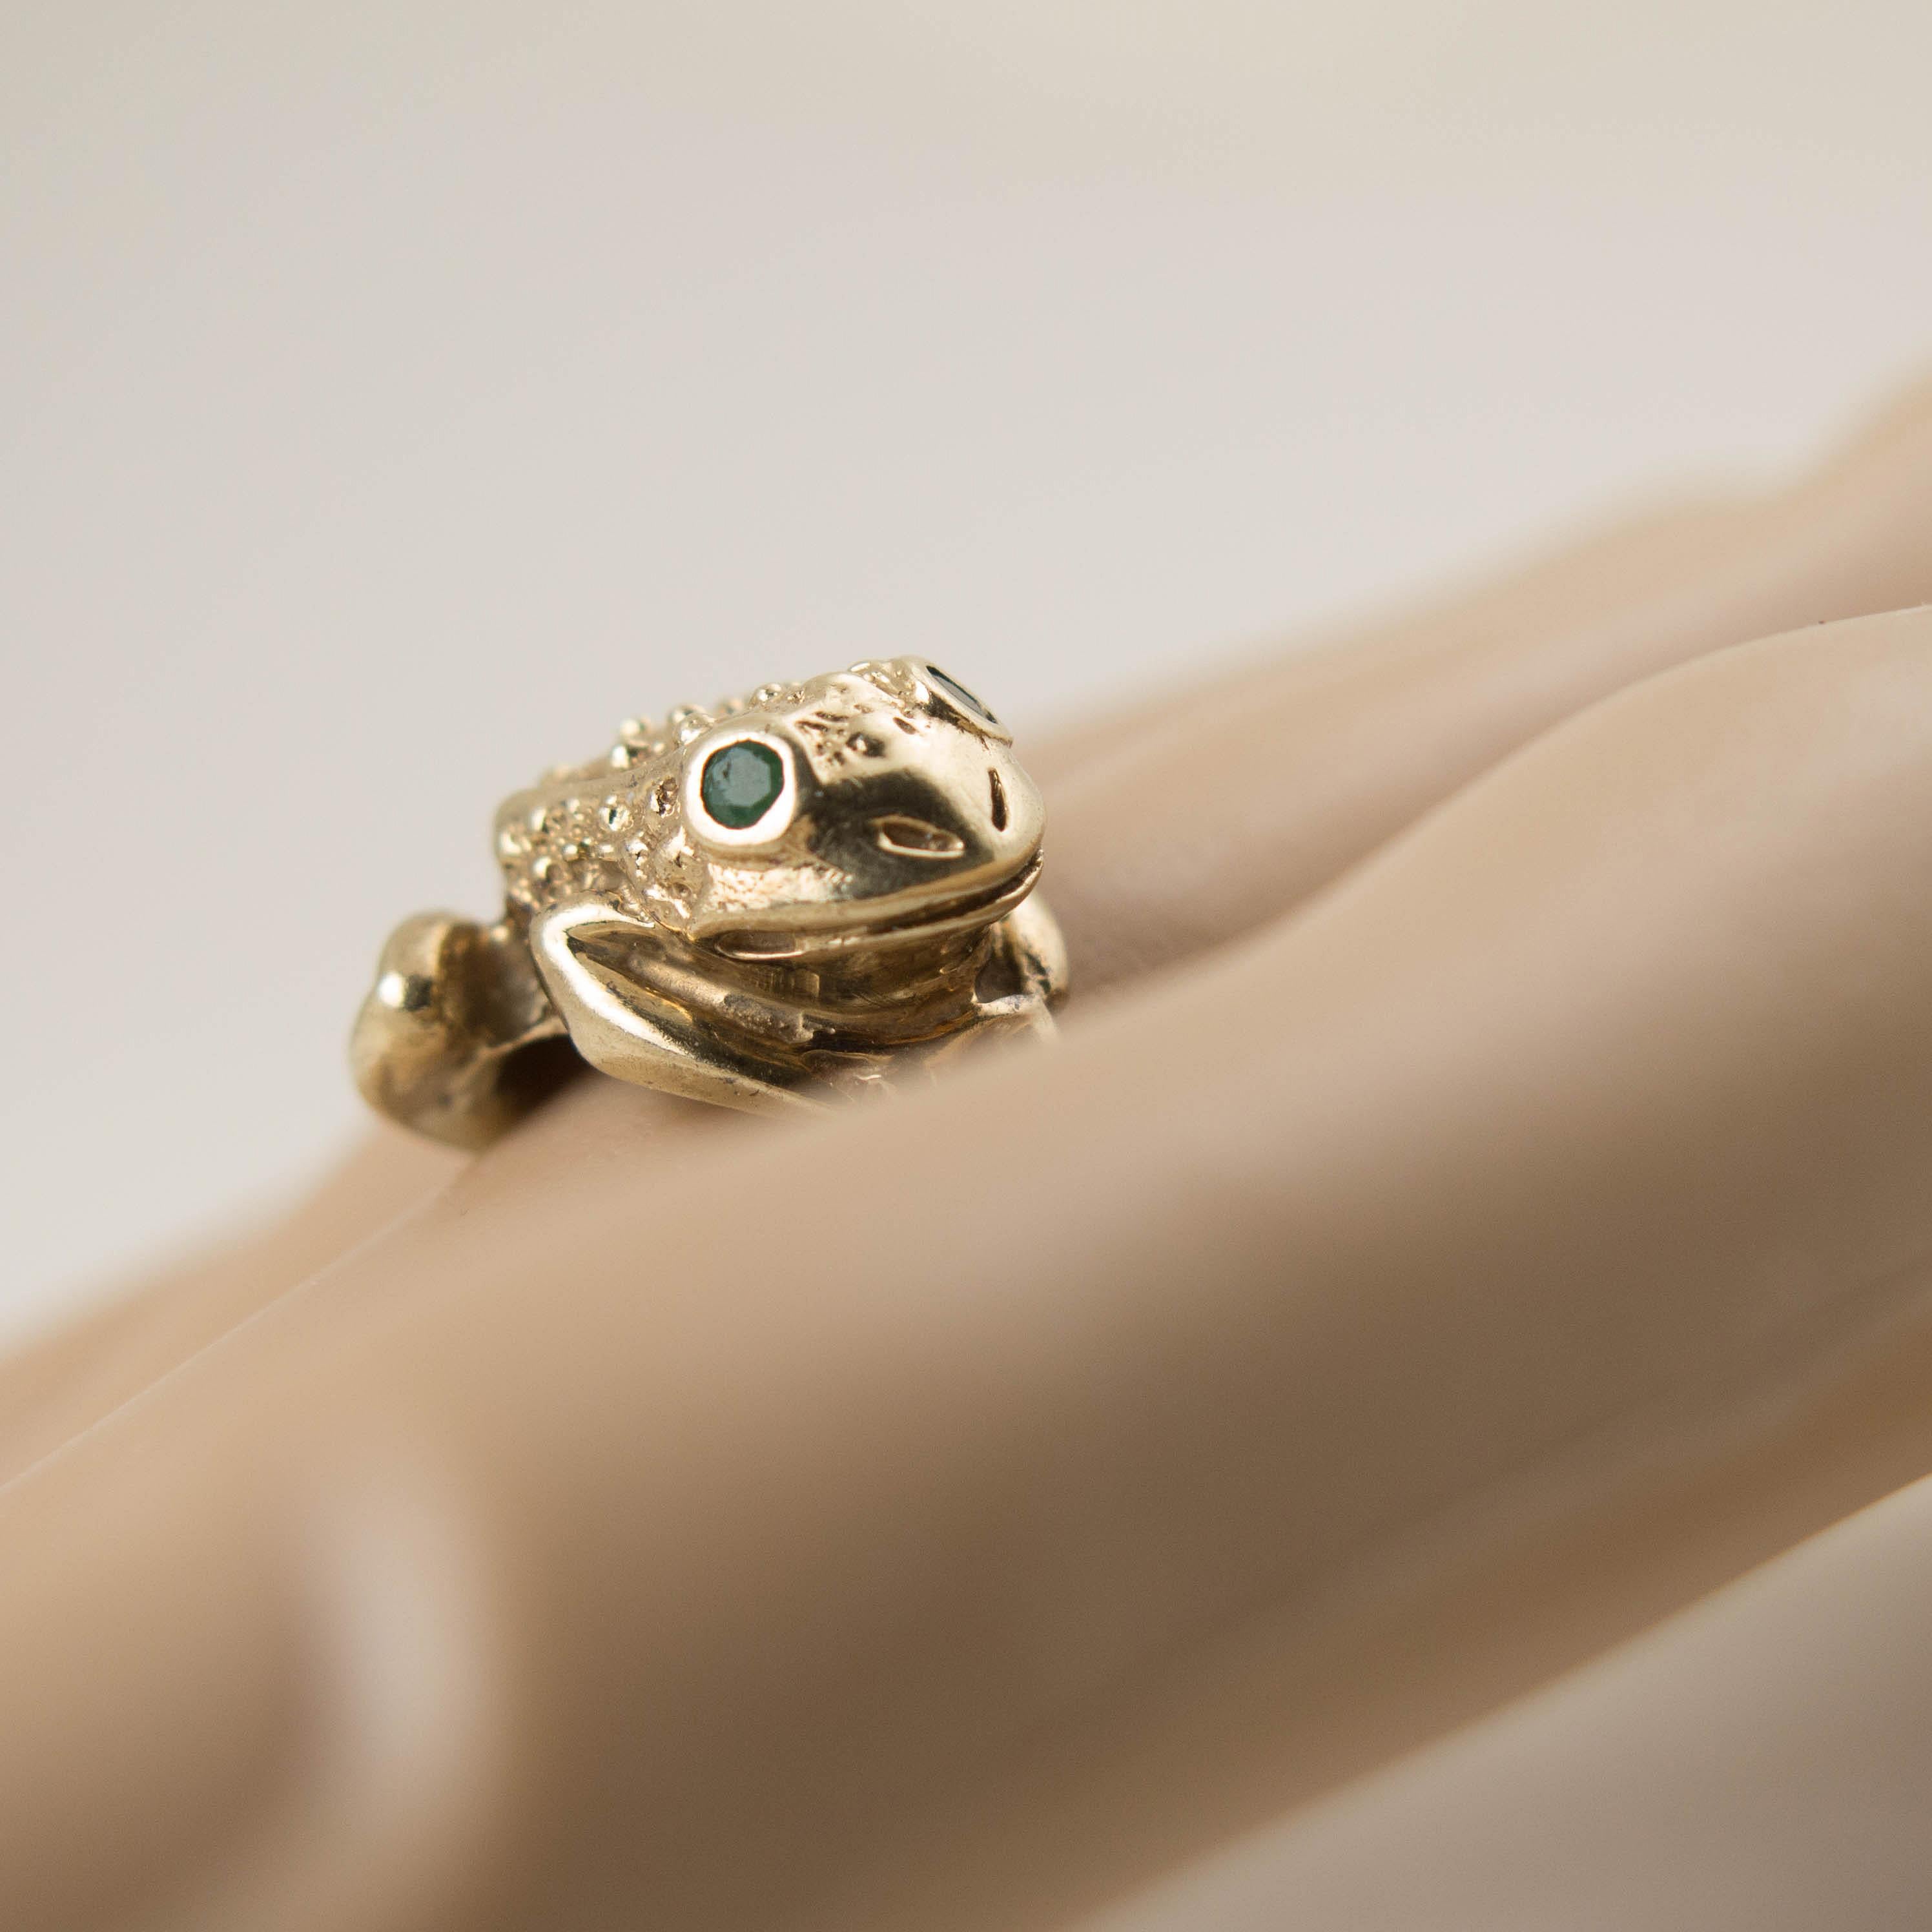 frog ring meaning